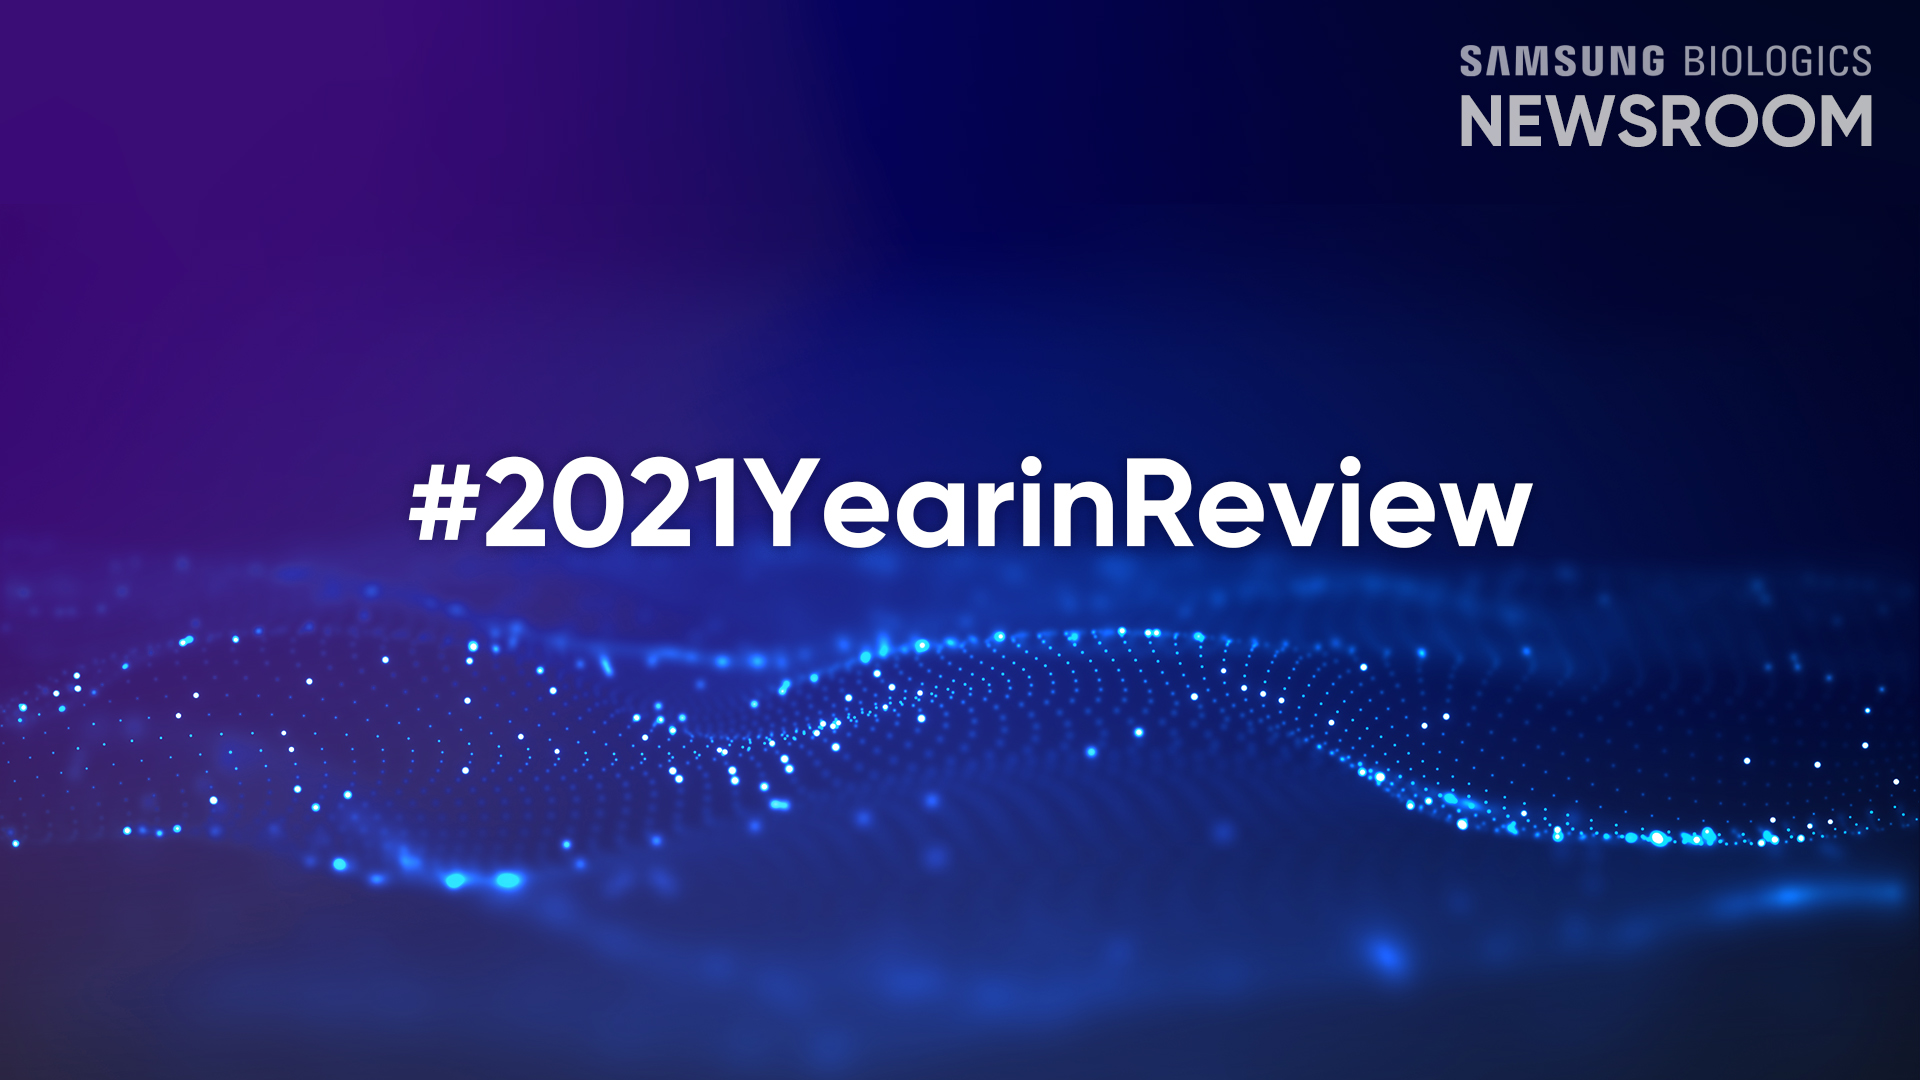 #2021YearinReview